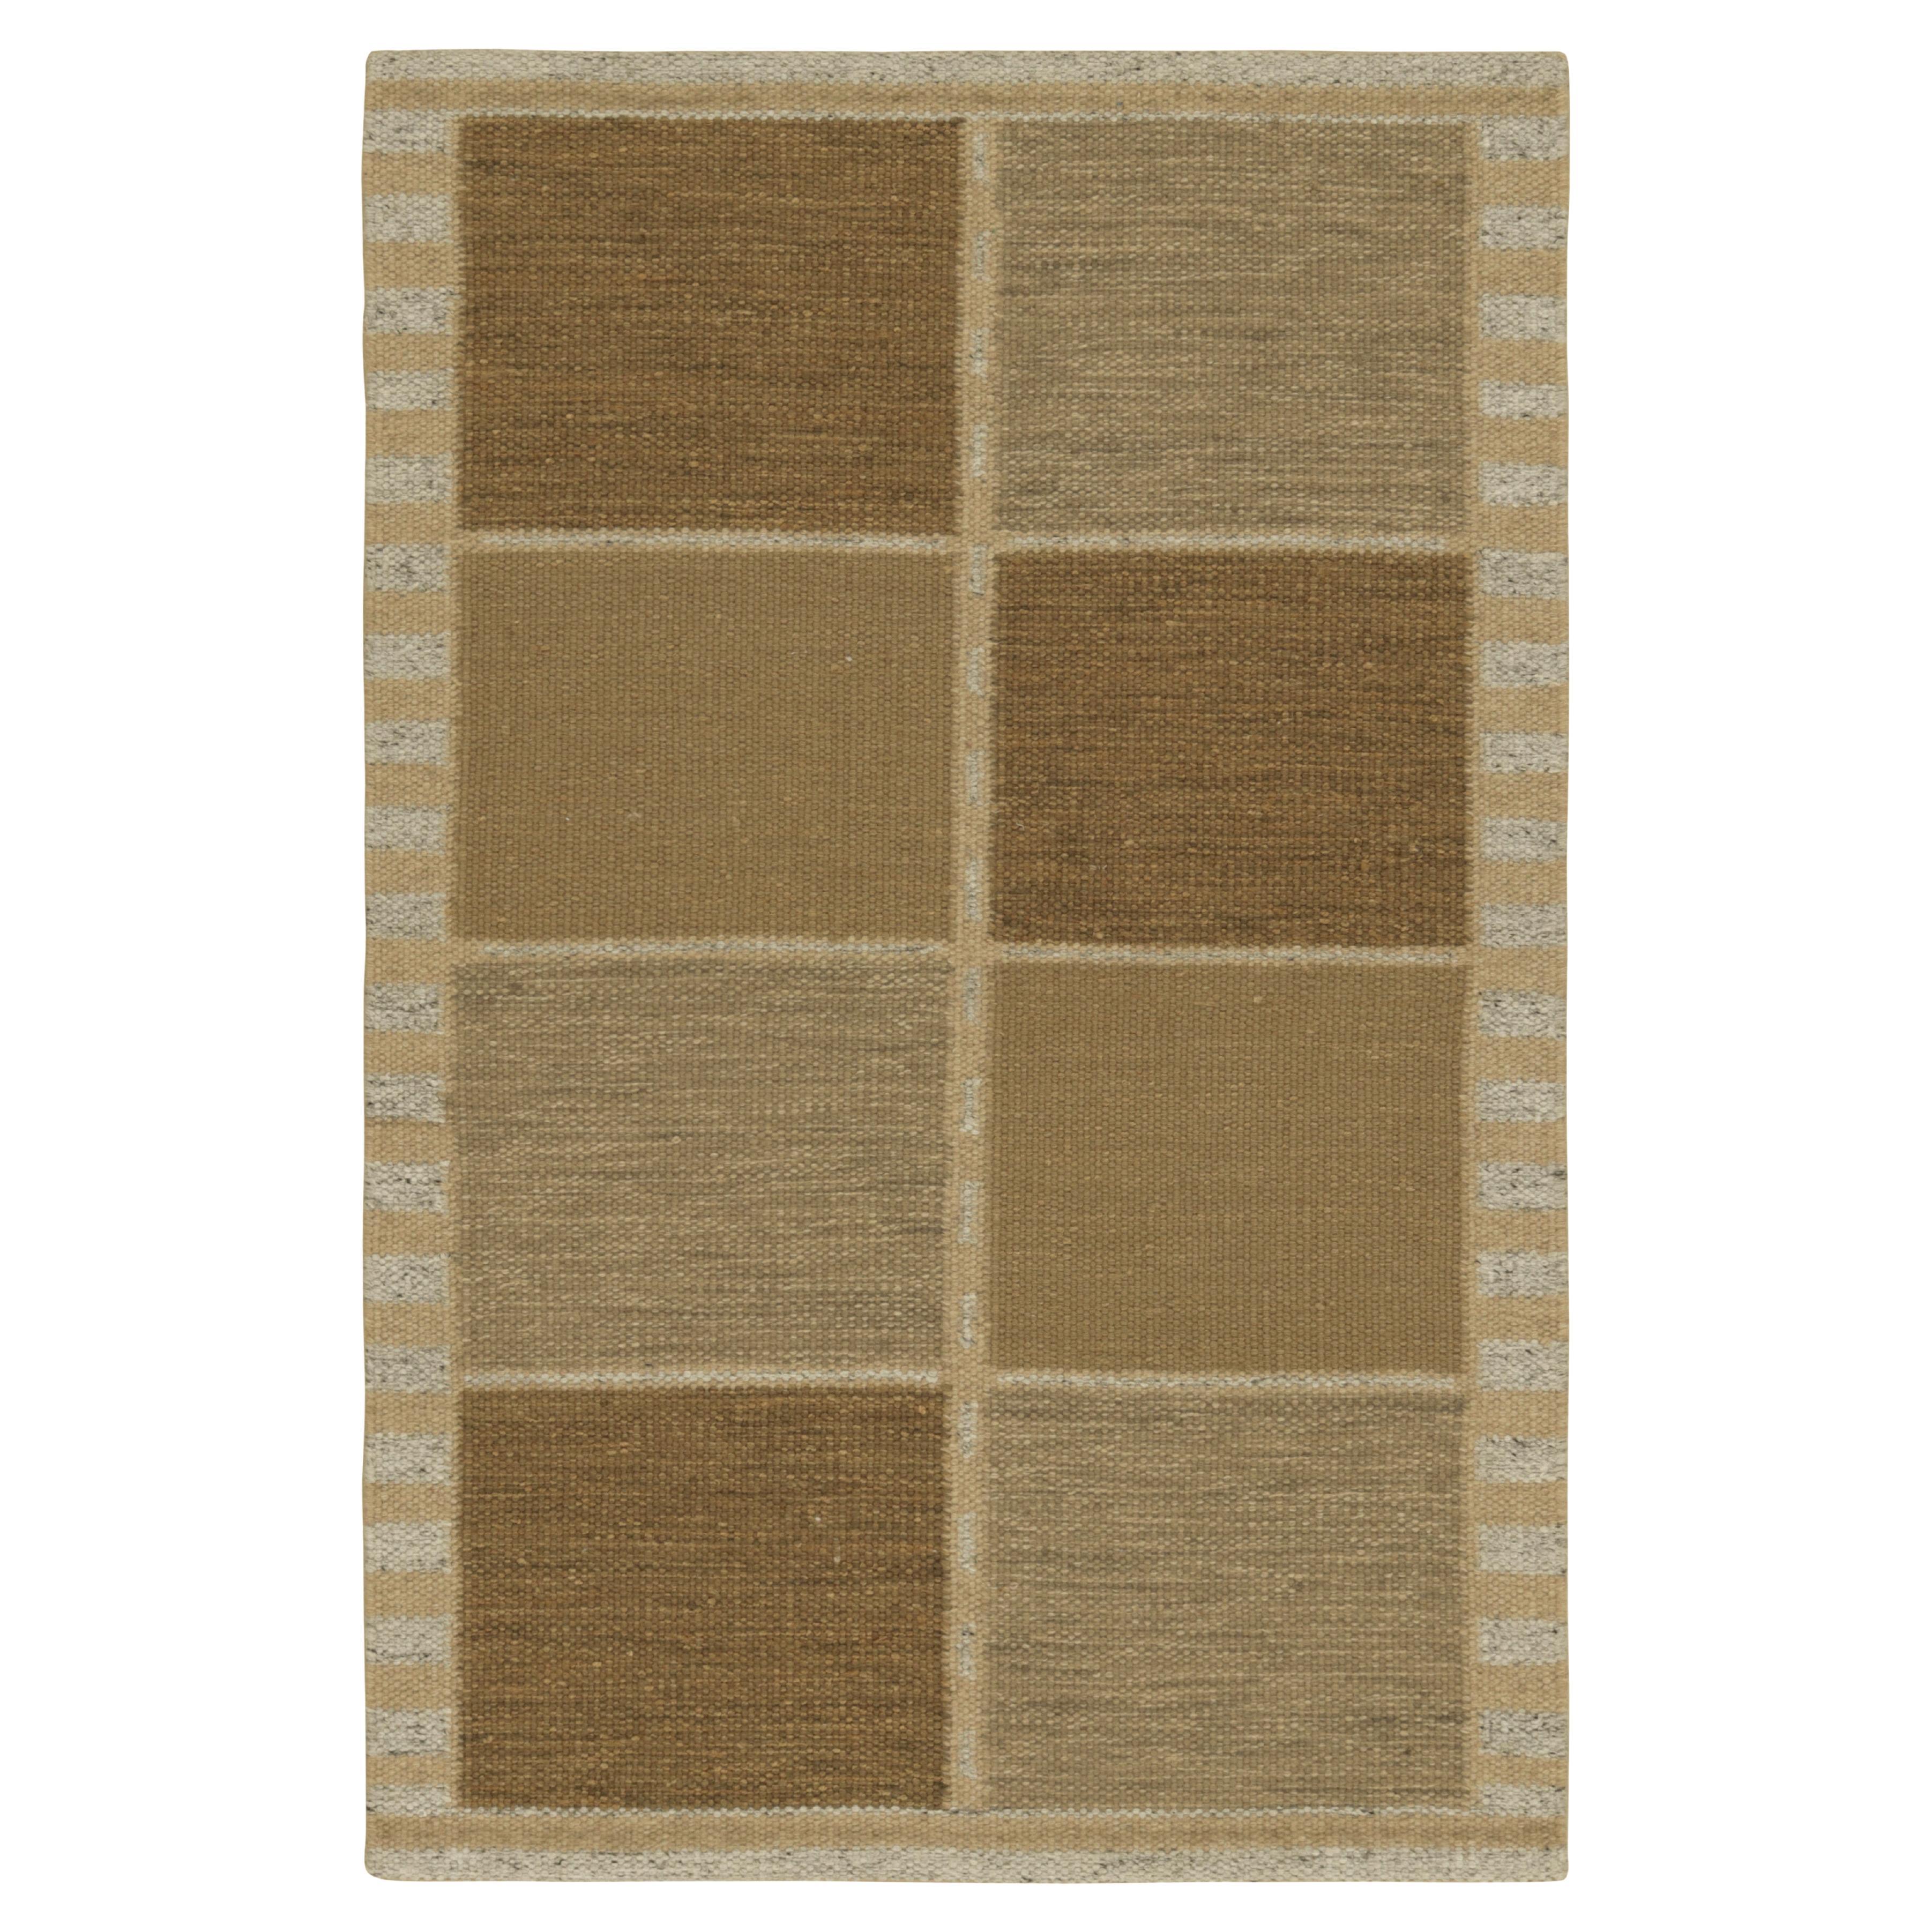 Rug & Kilim’s Scandinavian Style Rug in Beige-Brown, with Blue Geometric Pattern For Sale